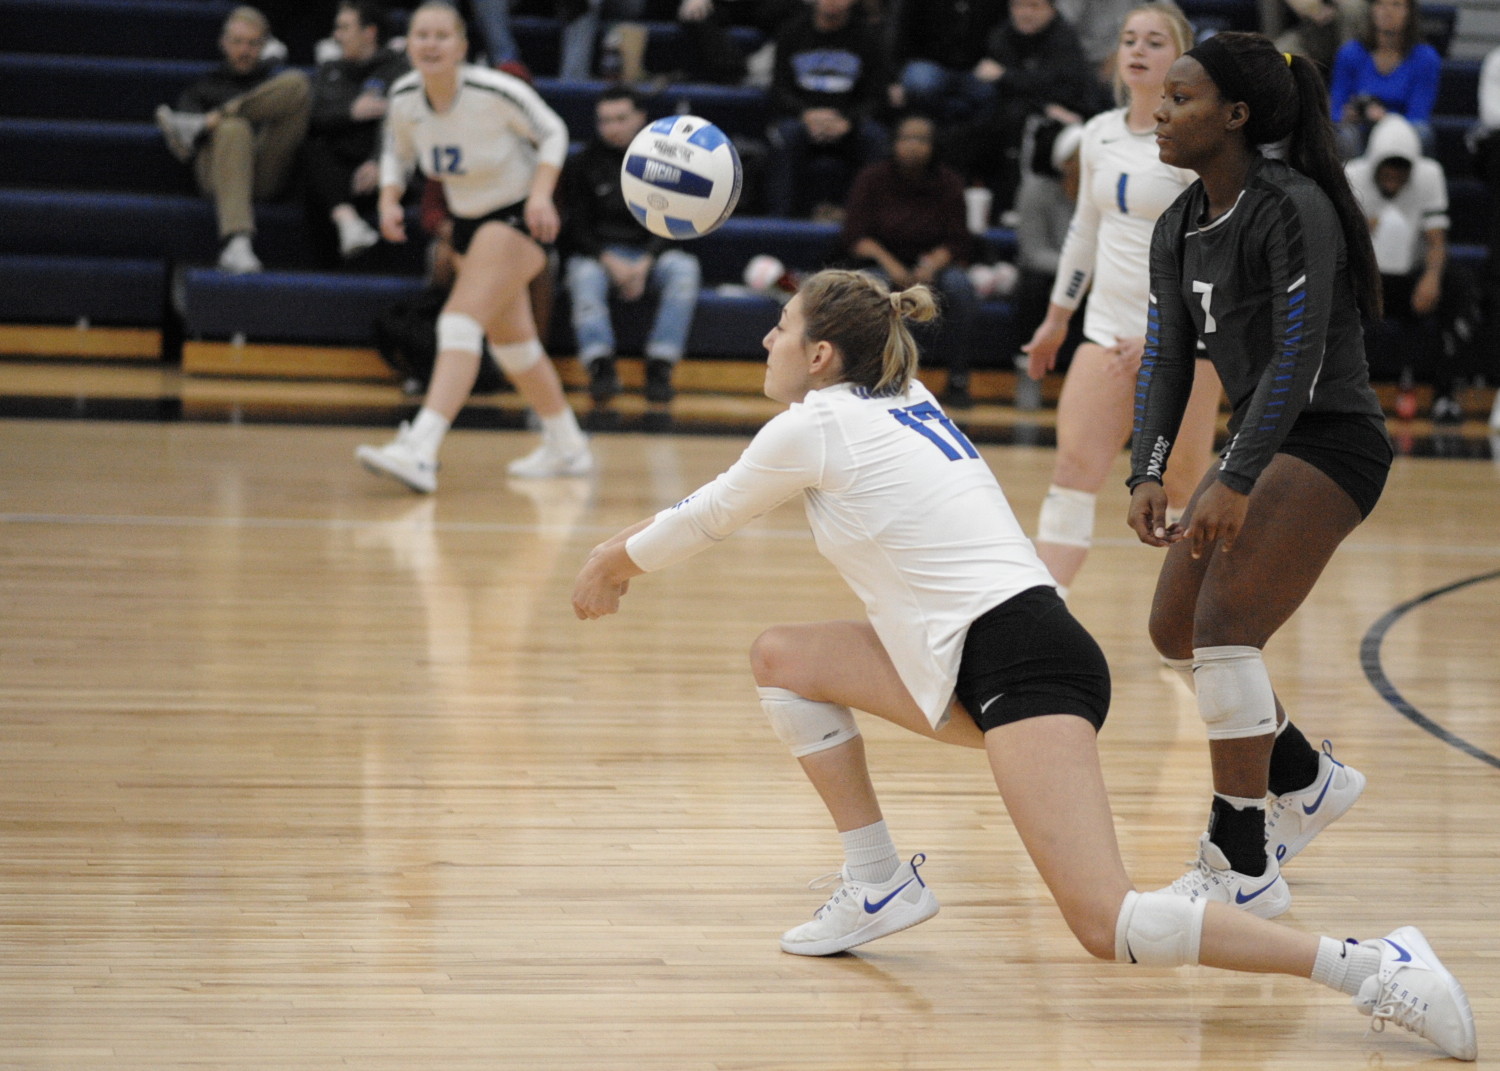 Dilsaver, Parker lead DMACC volleyball team past SWCC, 3-0